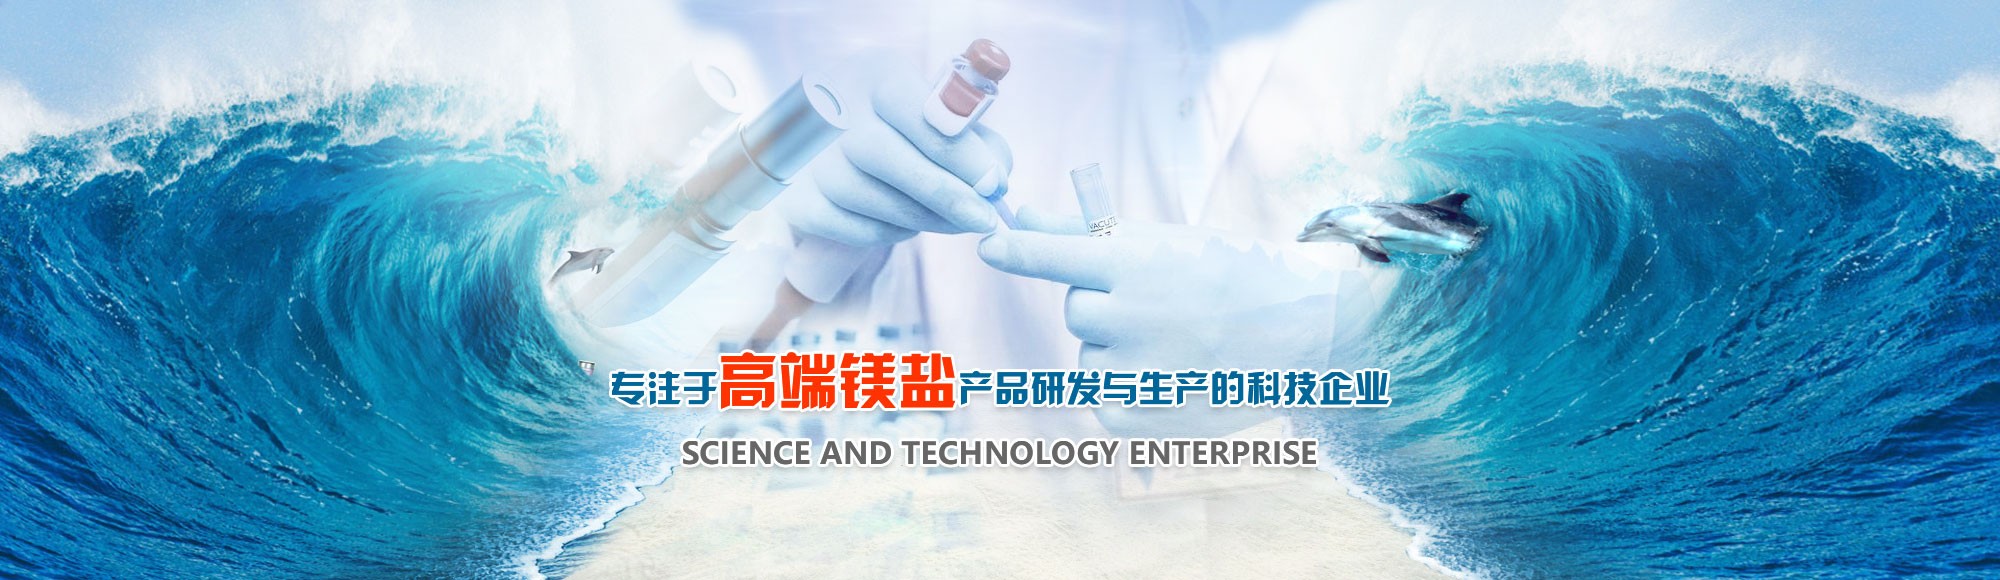 Scientific and Technological Enterprises Focusing on Research and Development and Production of High-end Magnesium Salt Products